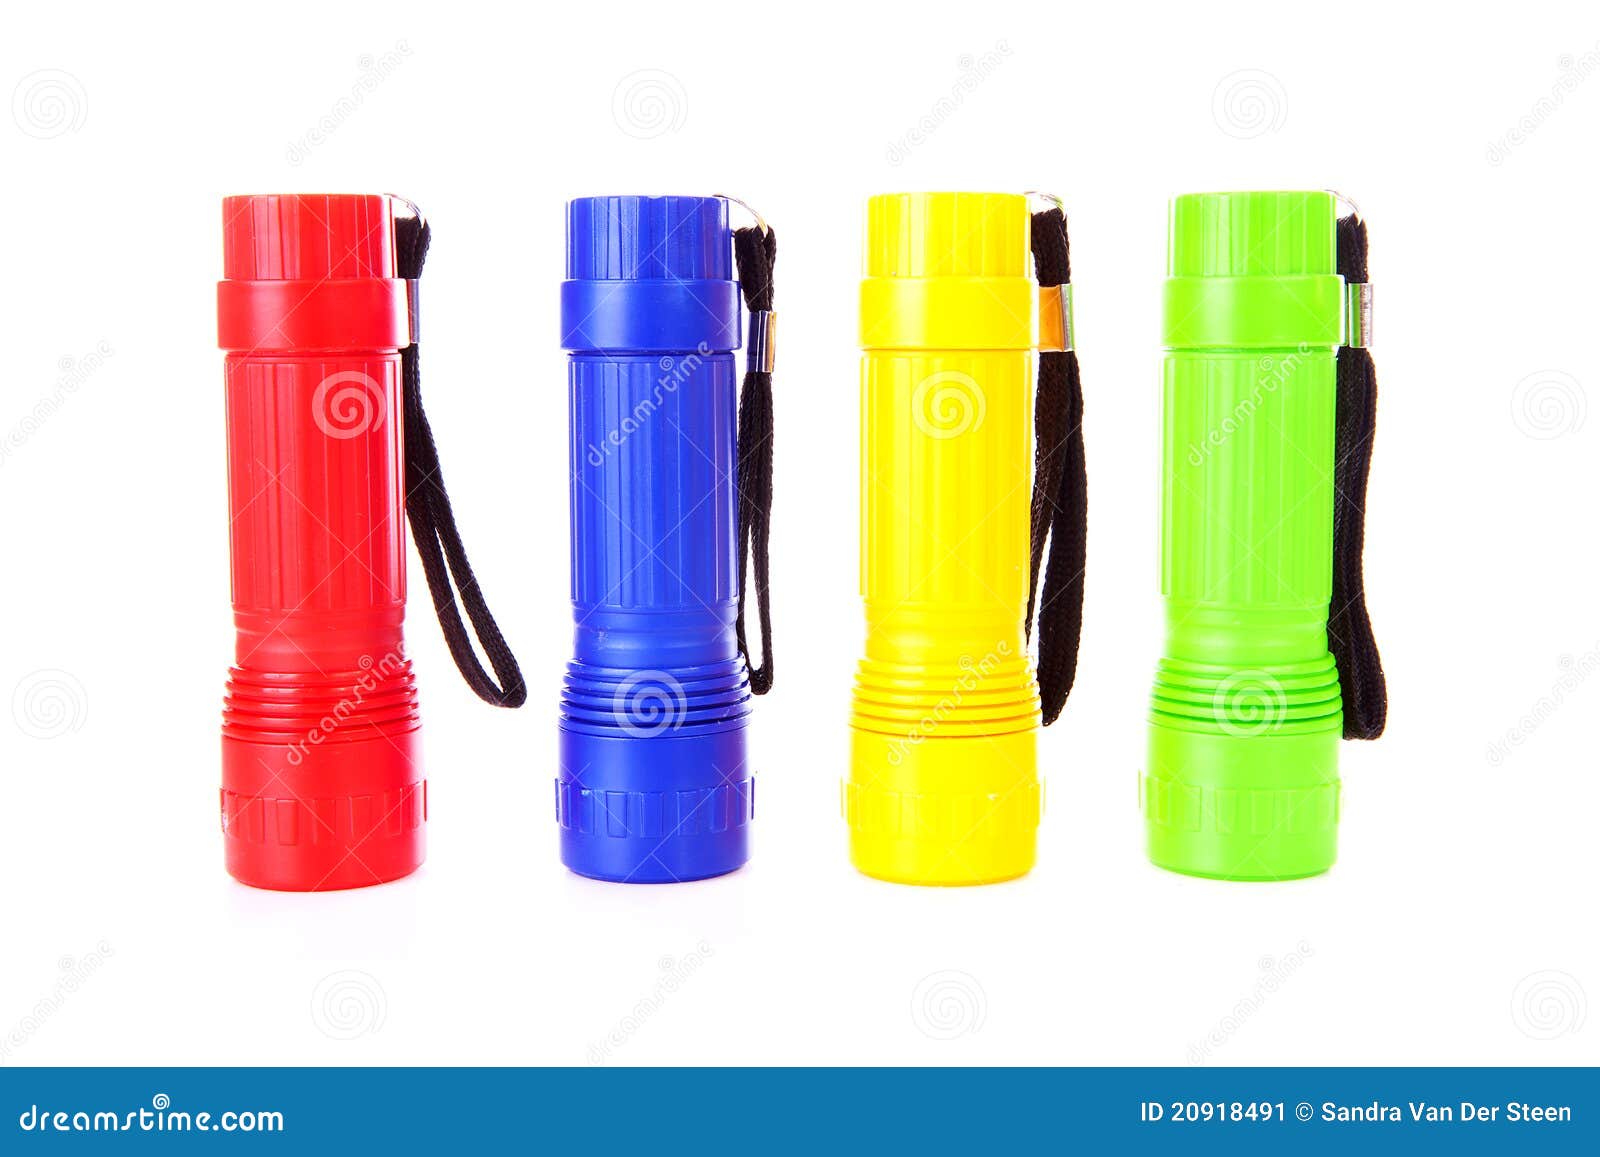 Four Colorful Flashlights Stock Image Image 20918491 BEDECOR Free Coloring Picture wallpaper give a chance to color on the wall without getting in trouble! Fill the walls of your home or office with stress-relieving [bedroomdecorz.blogspot.com]